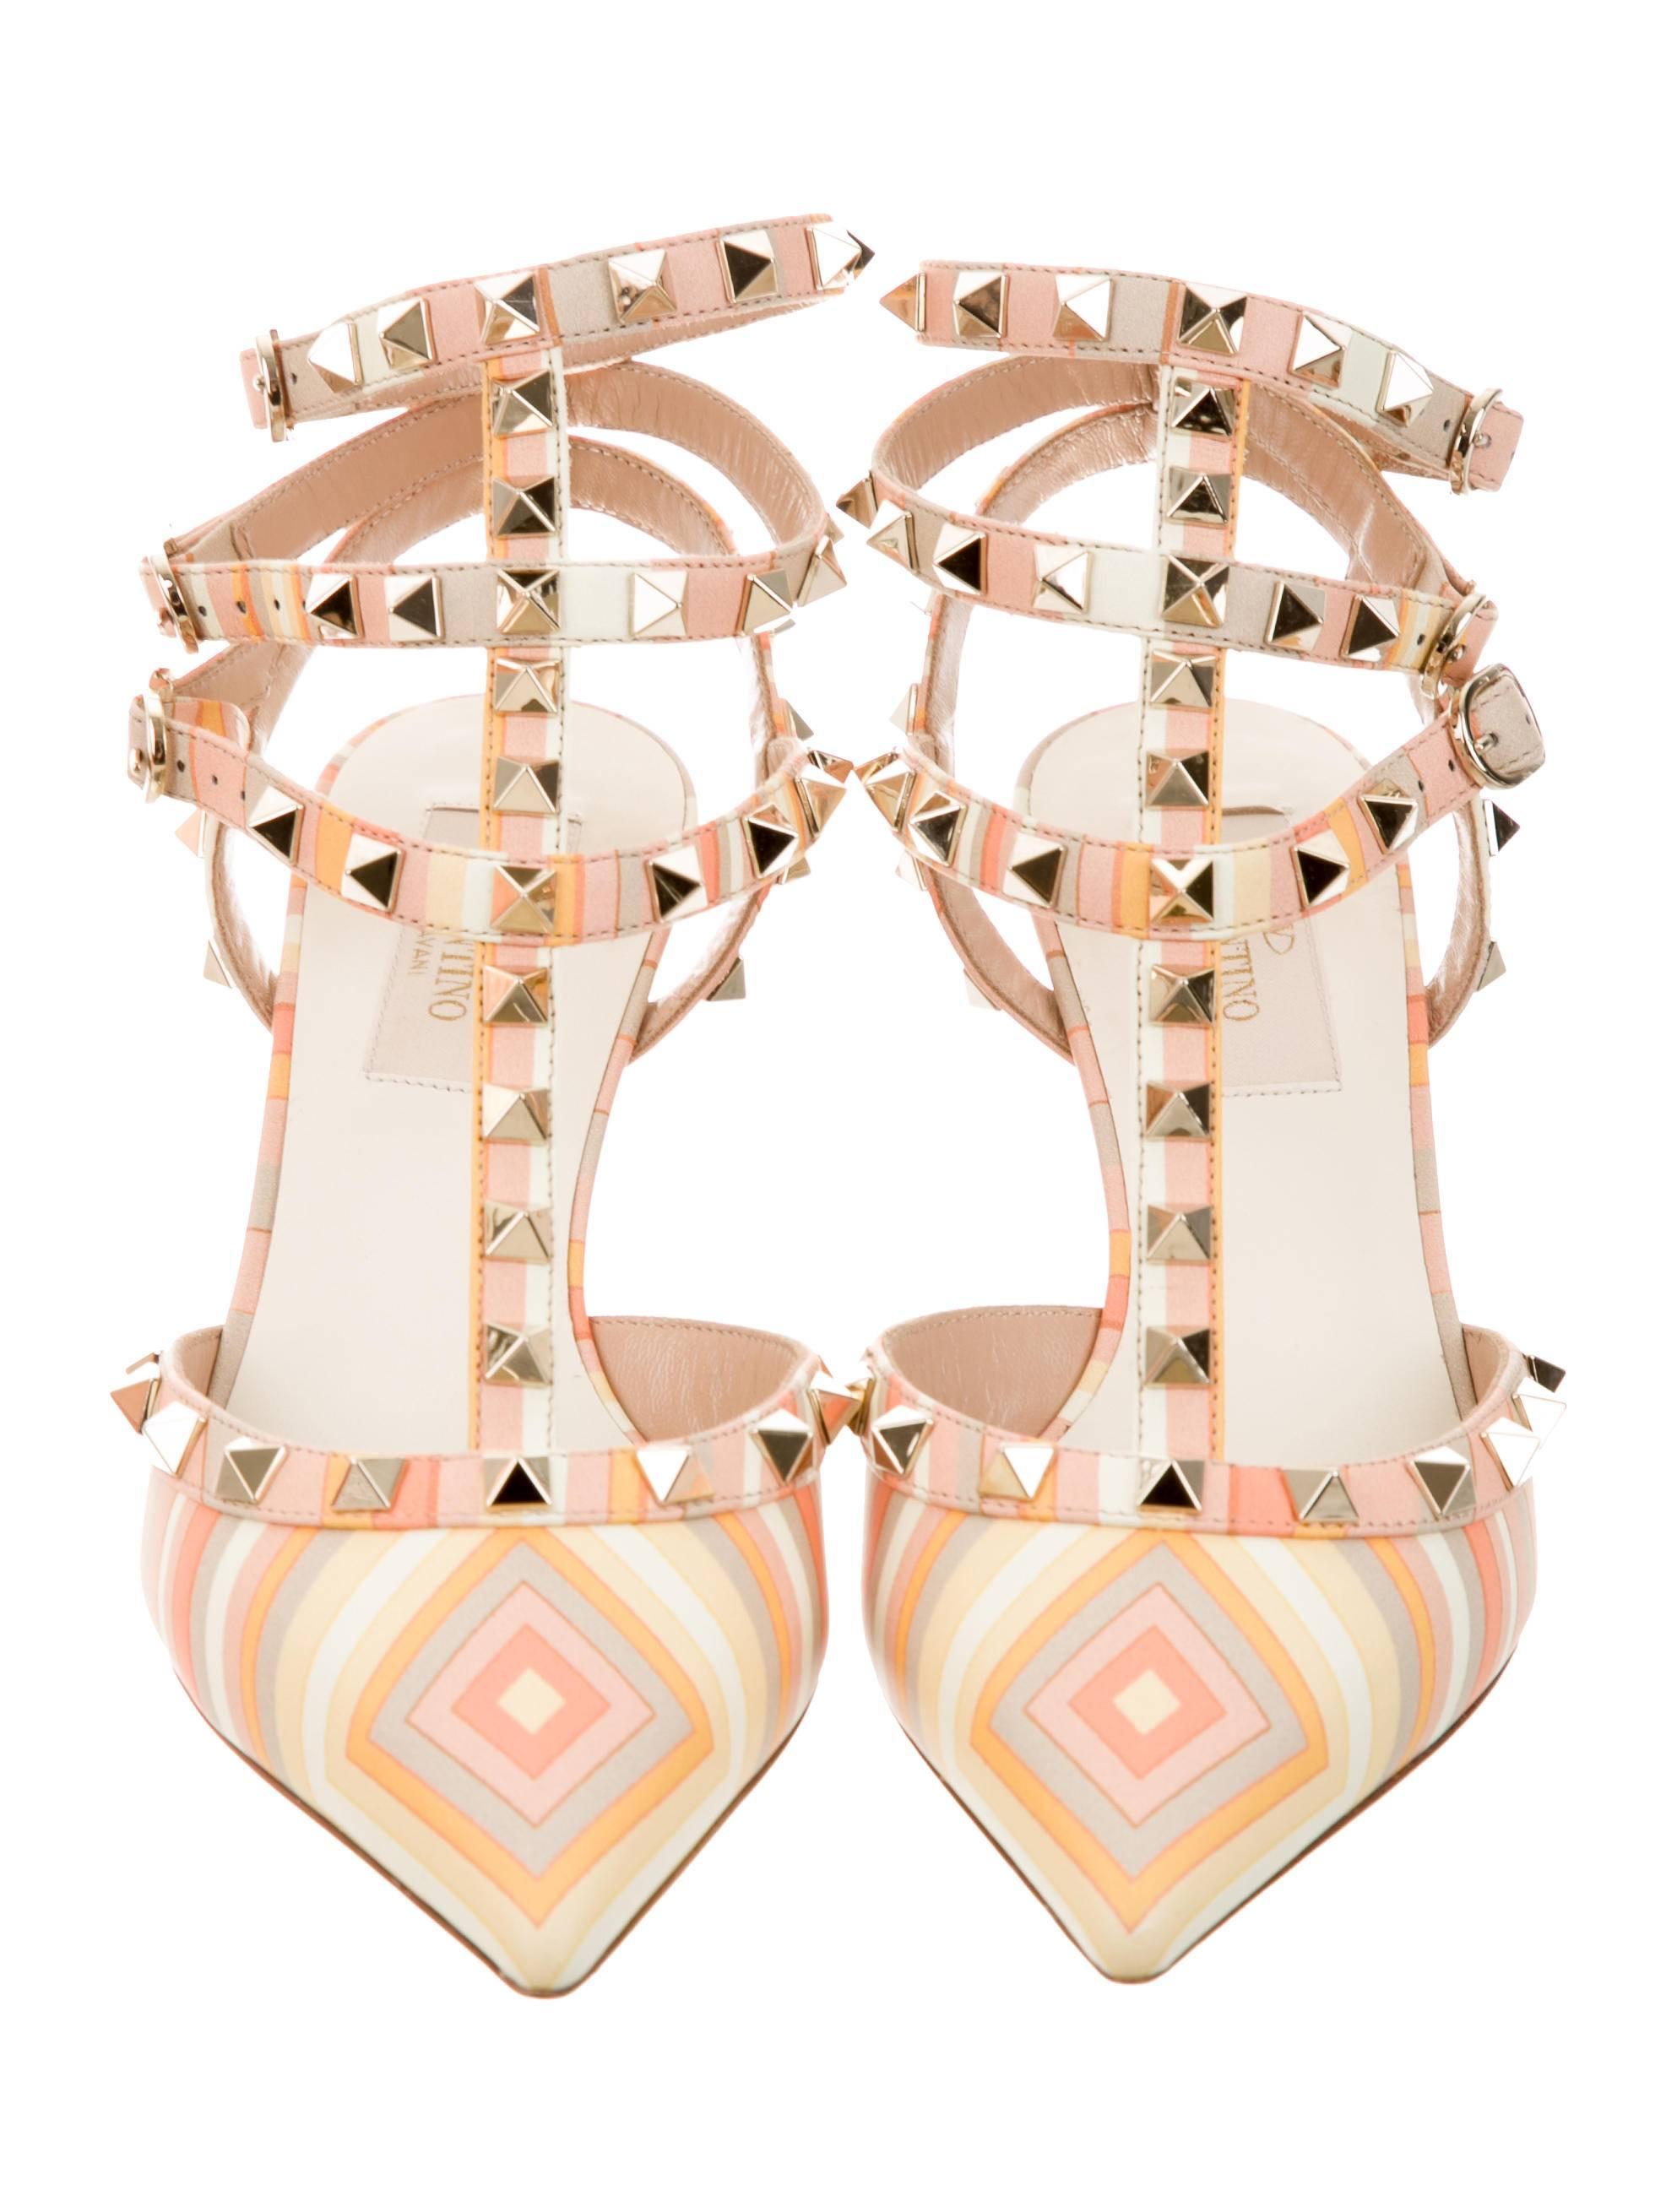 
CURATOR'S NOTES
Valentino NEW & SOLD OUT Pastel Multi Leather Stud Sandals Heels in Box 

Size IT 36
Leather
Gold tone hardware
Adjustable ankle strap closure
Made in Italy
Heel height 2.5